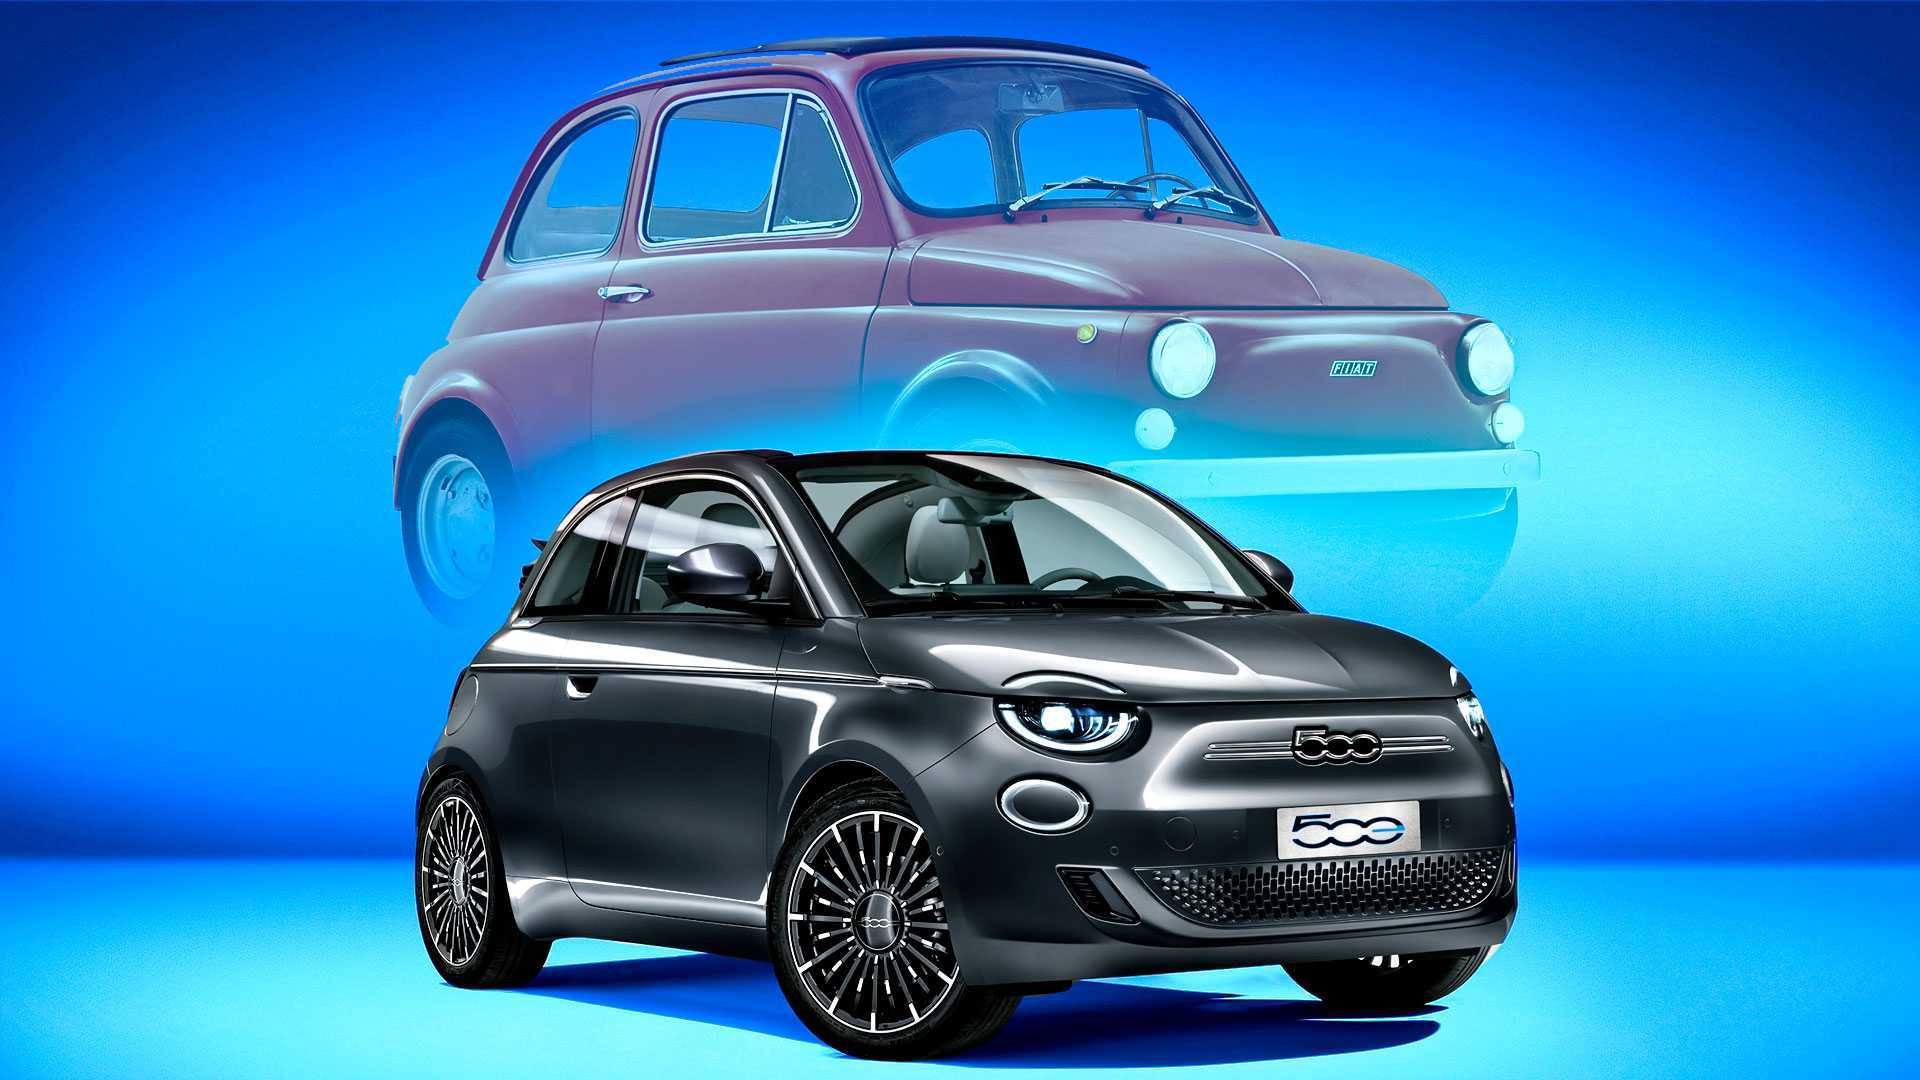 New Fiat 500e Debuts With 118 Horsepower, 199-Mile Range